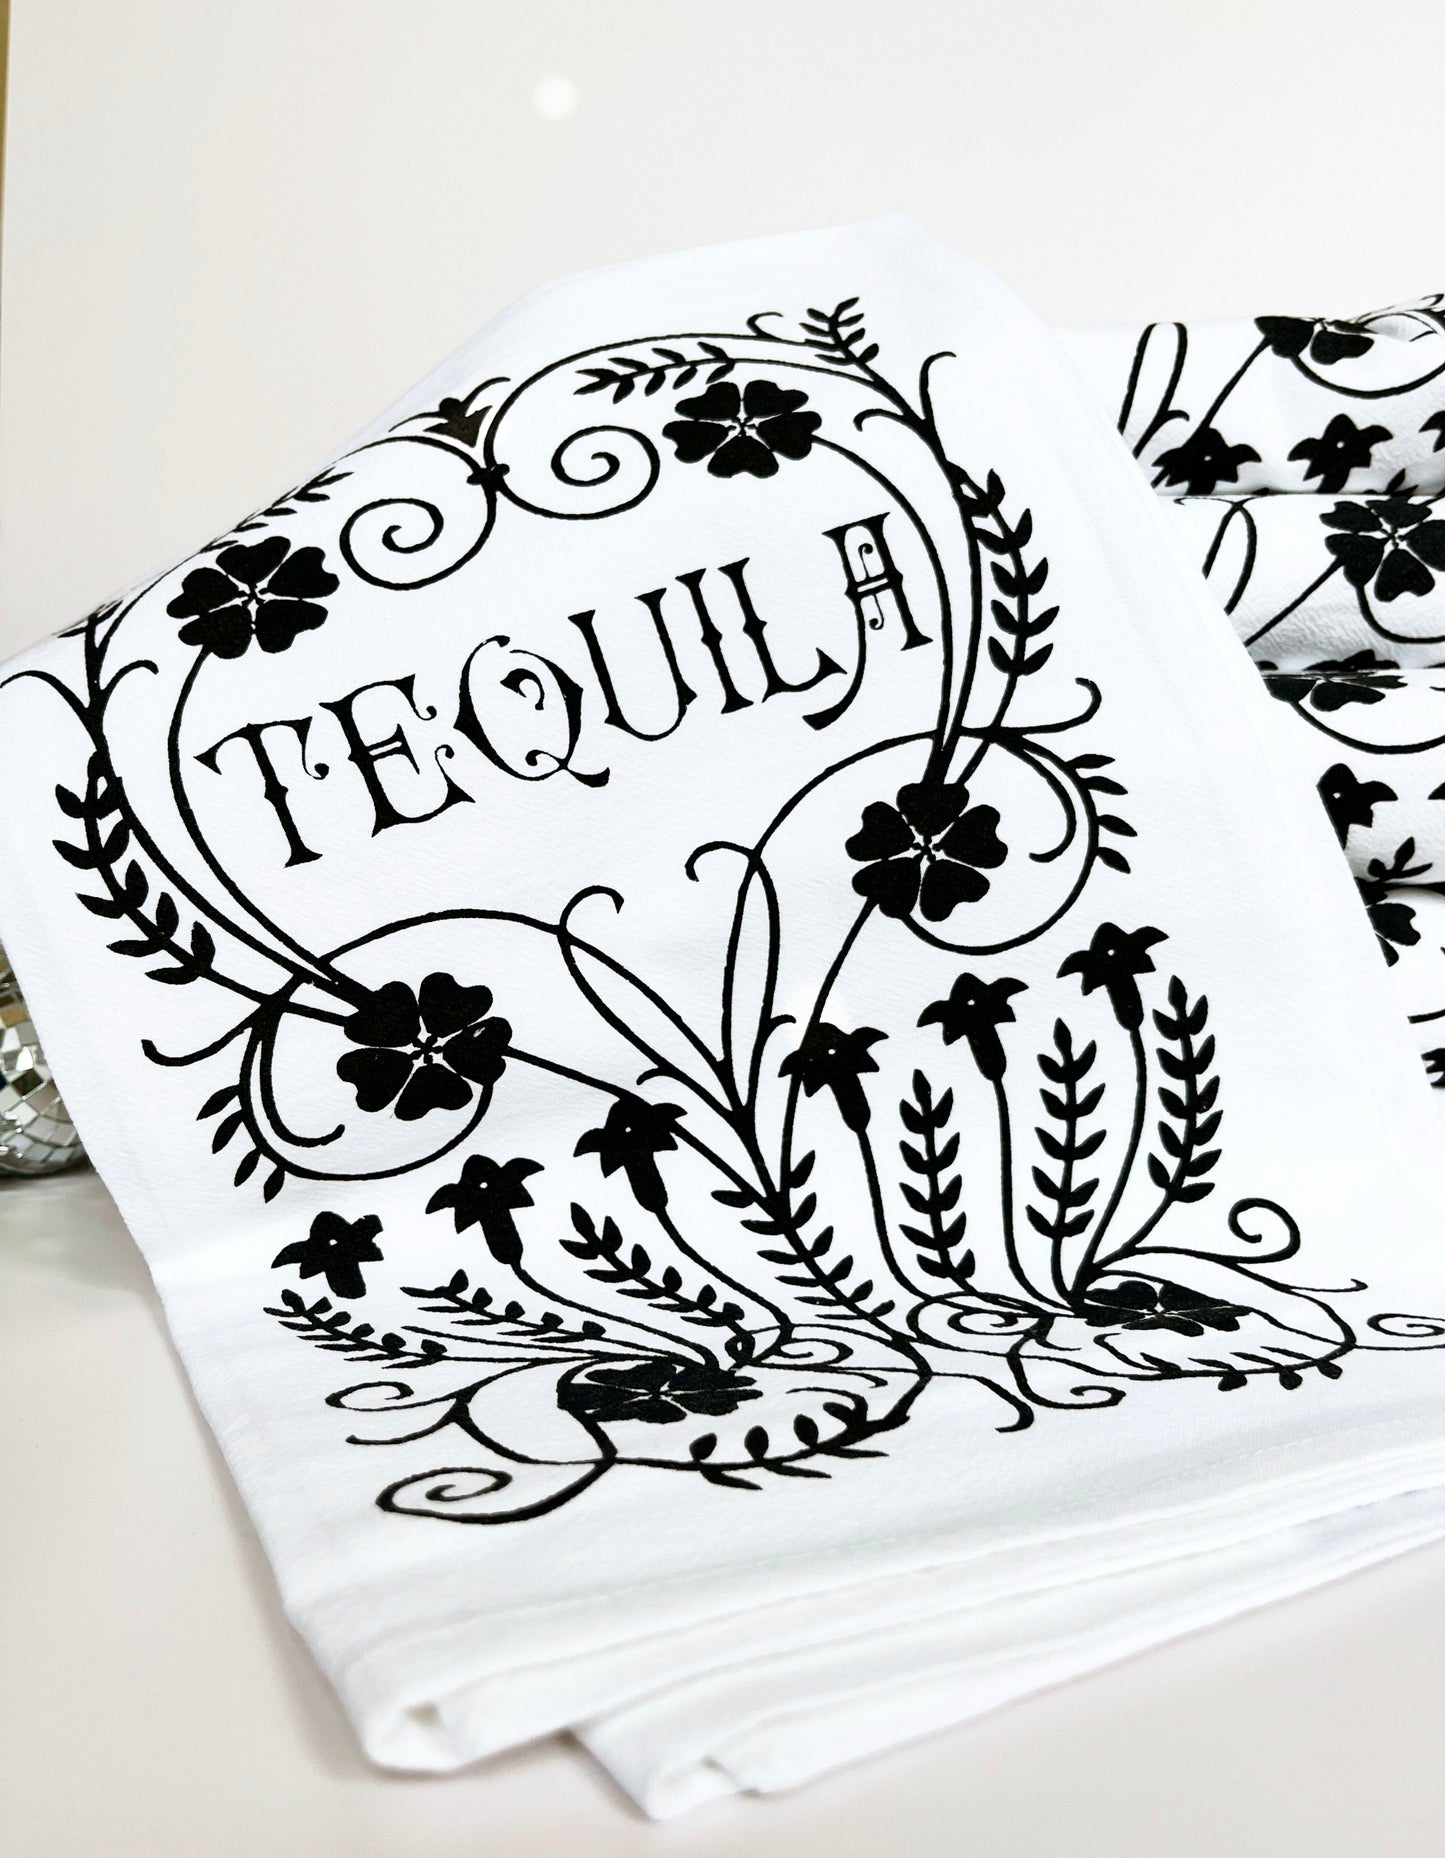 tequila drink happy hour cute kitchen tea dish bar towel housewarming wedding gift coin laundry screen print black white home decor flowers floral gifts for dad